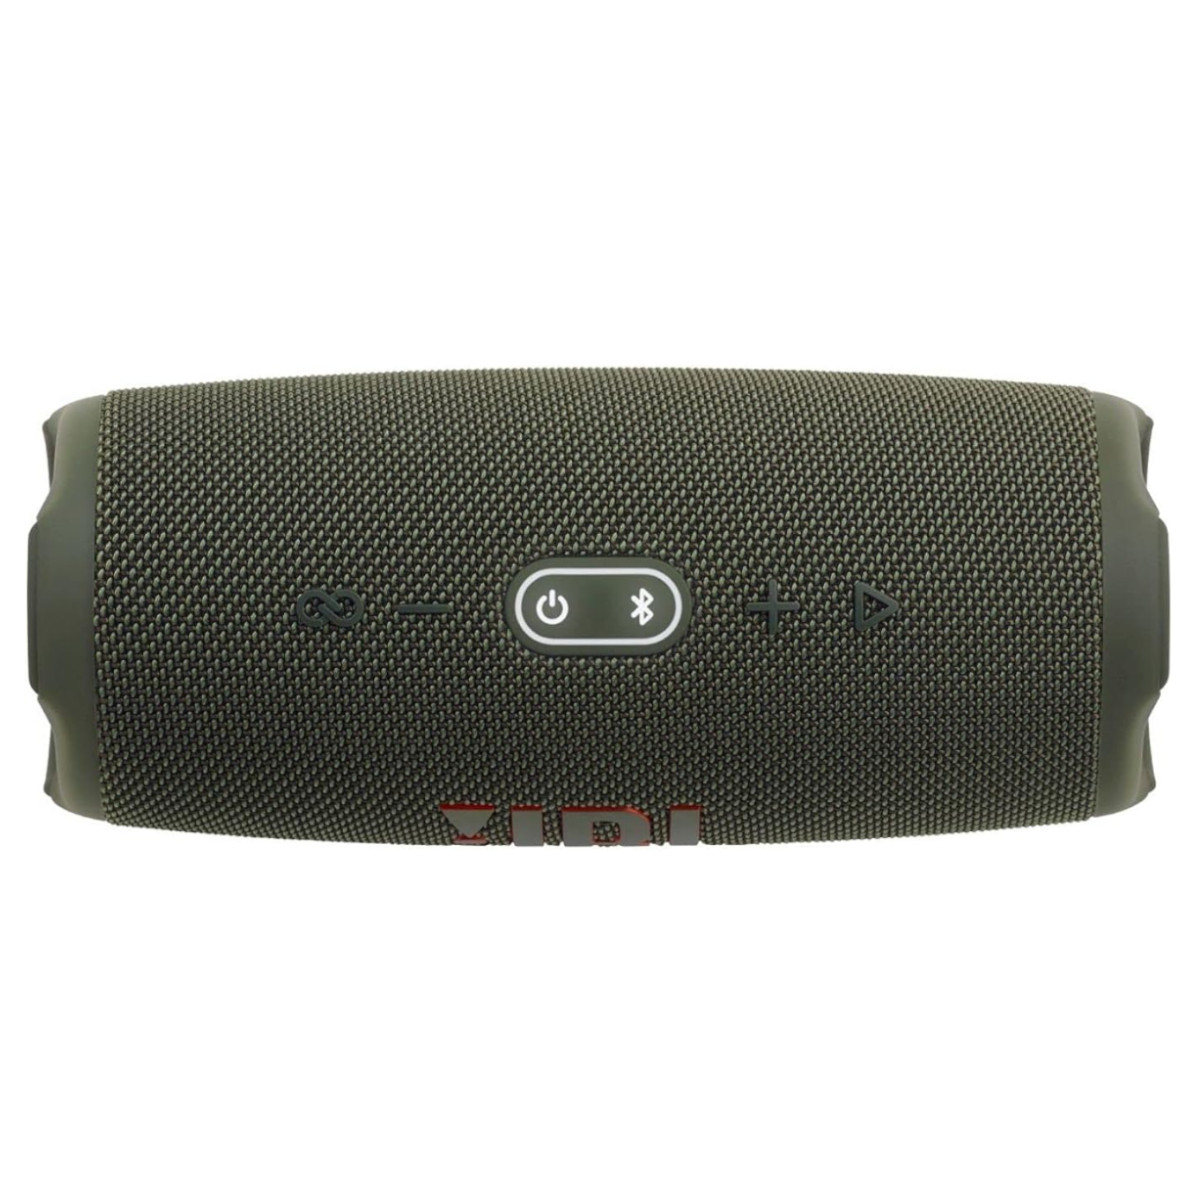 Bocina JBL Charge 5 Bluetooth Impermeable IP67 20 Horas Verde Bosque